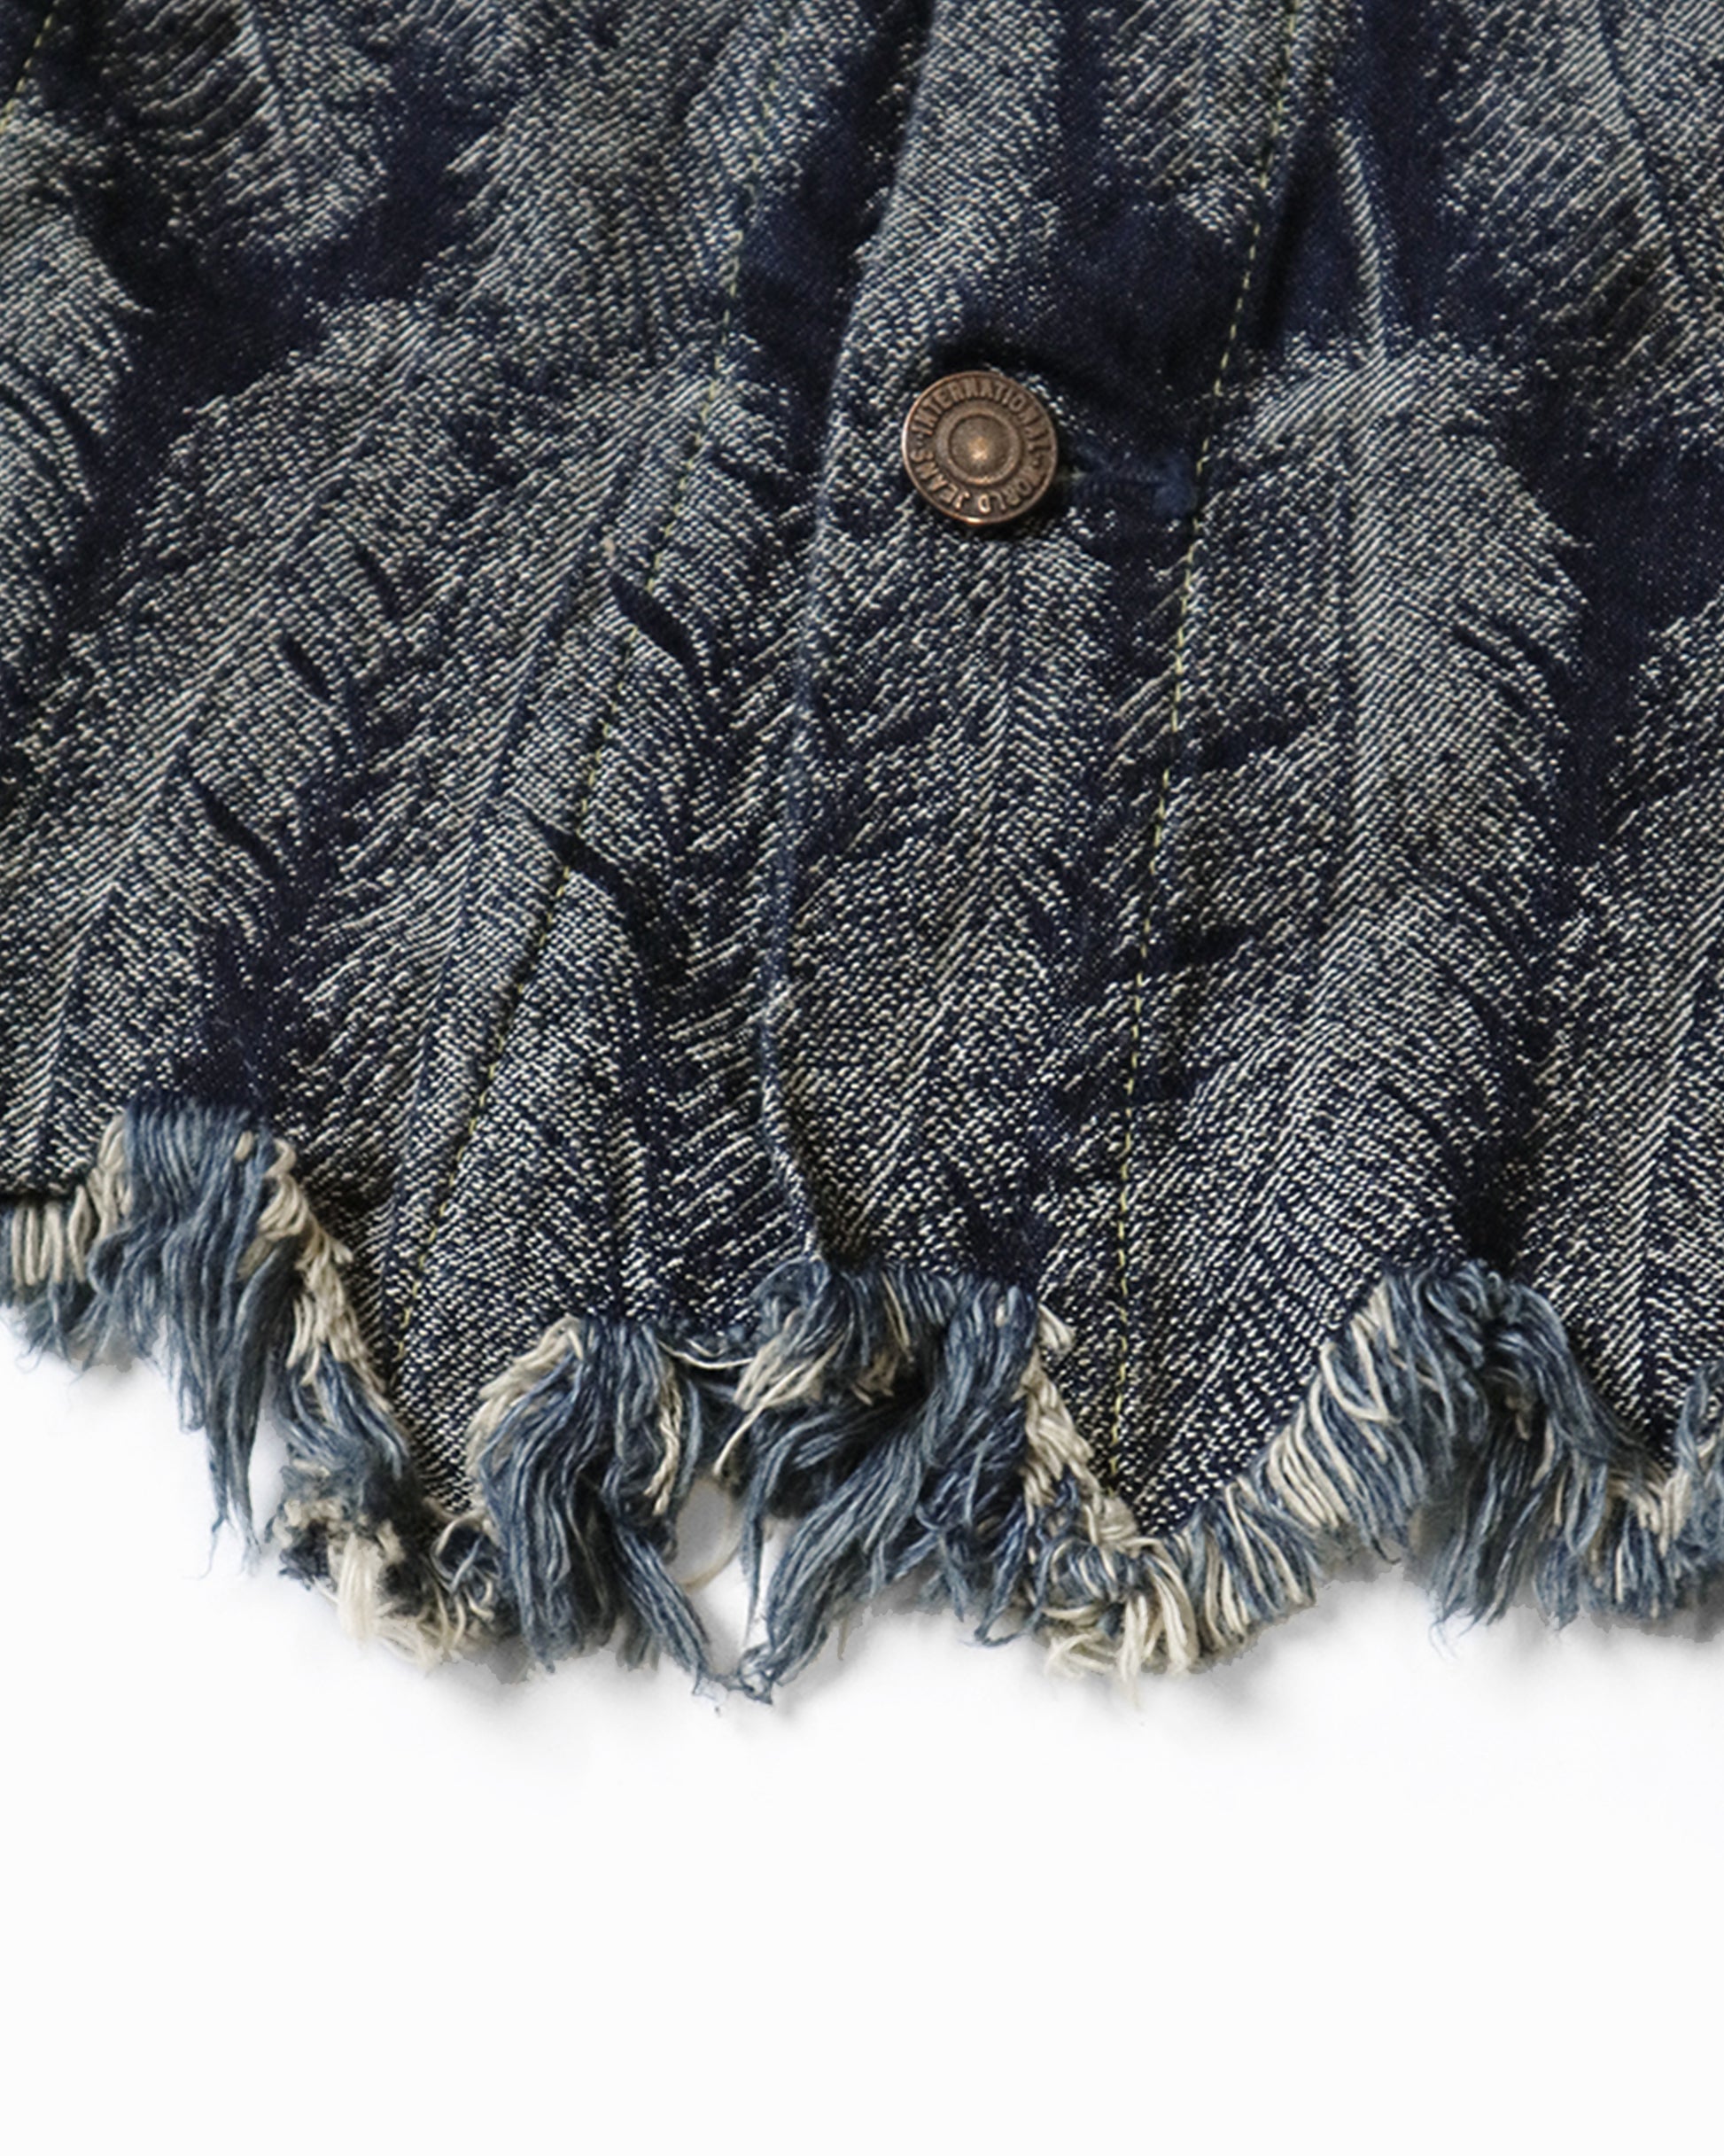 A Type III jacket made from denim jacquard with a 3D luxurious feather pattern and a fringy hem.